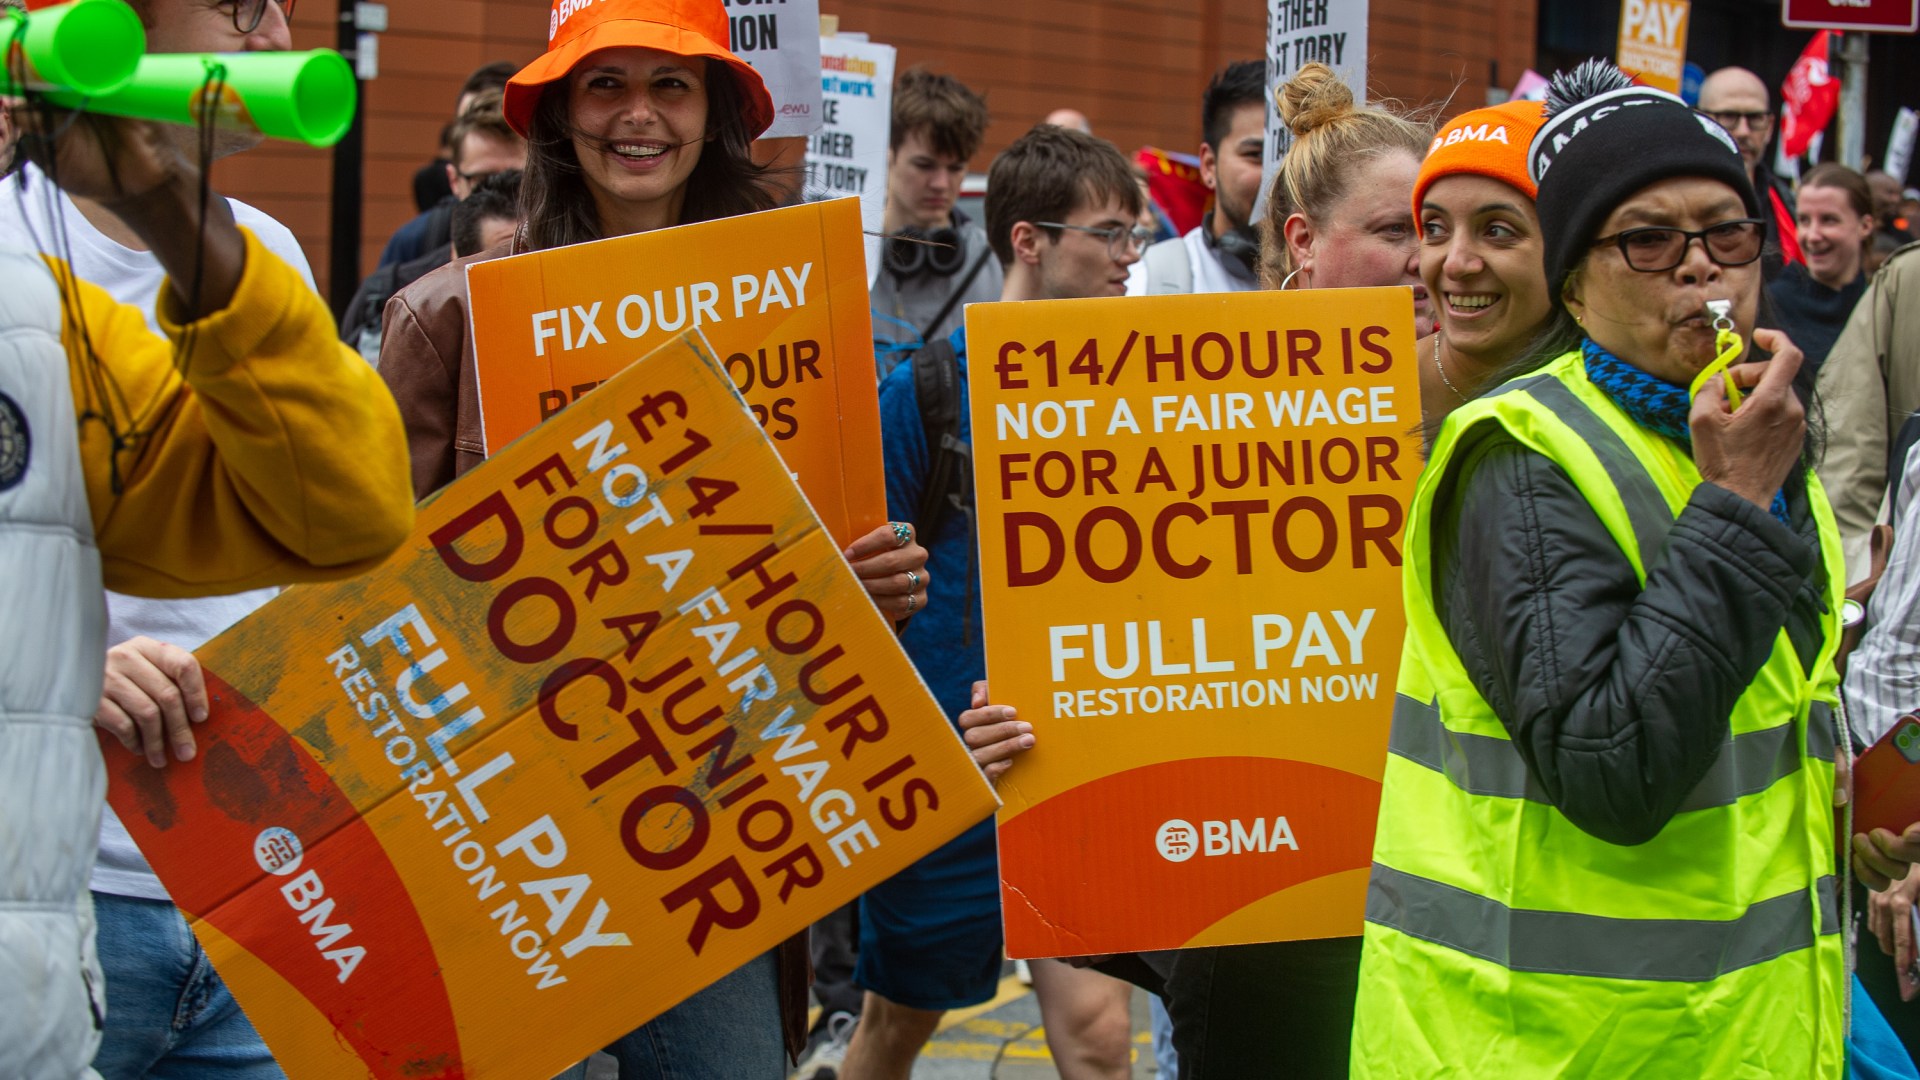 Third group of NHS doctors threaten to strike as hospitals pay £3,000 per shift for cover